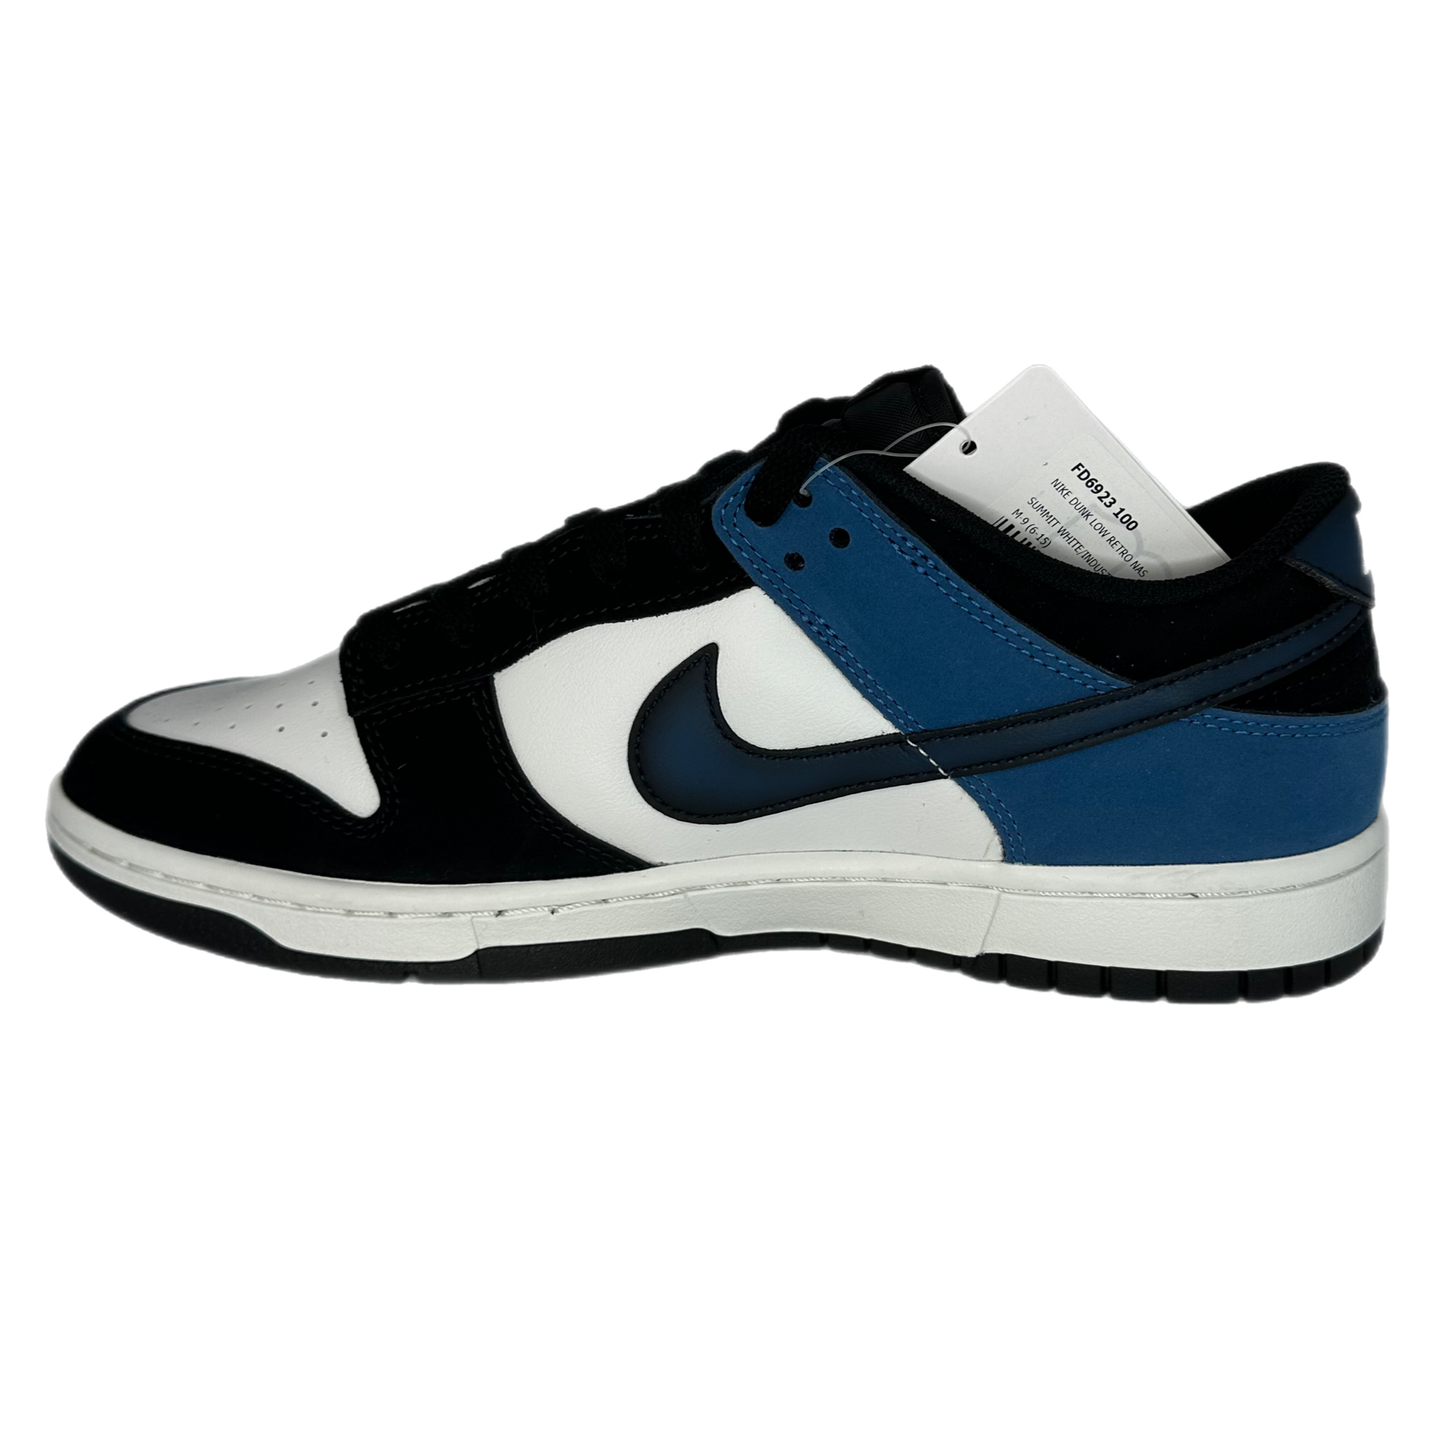 Nike - "Dunk Low Unreleased Sample" -Size 9